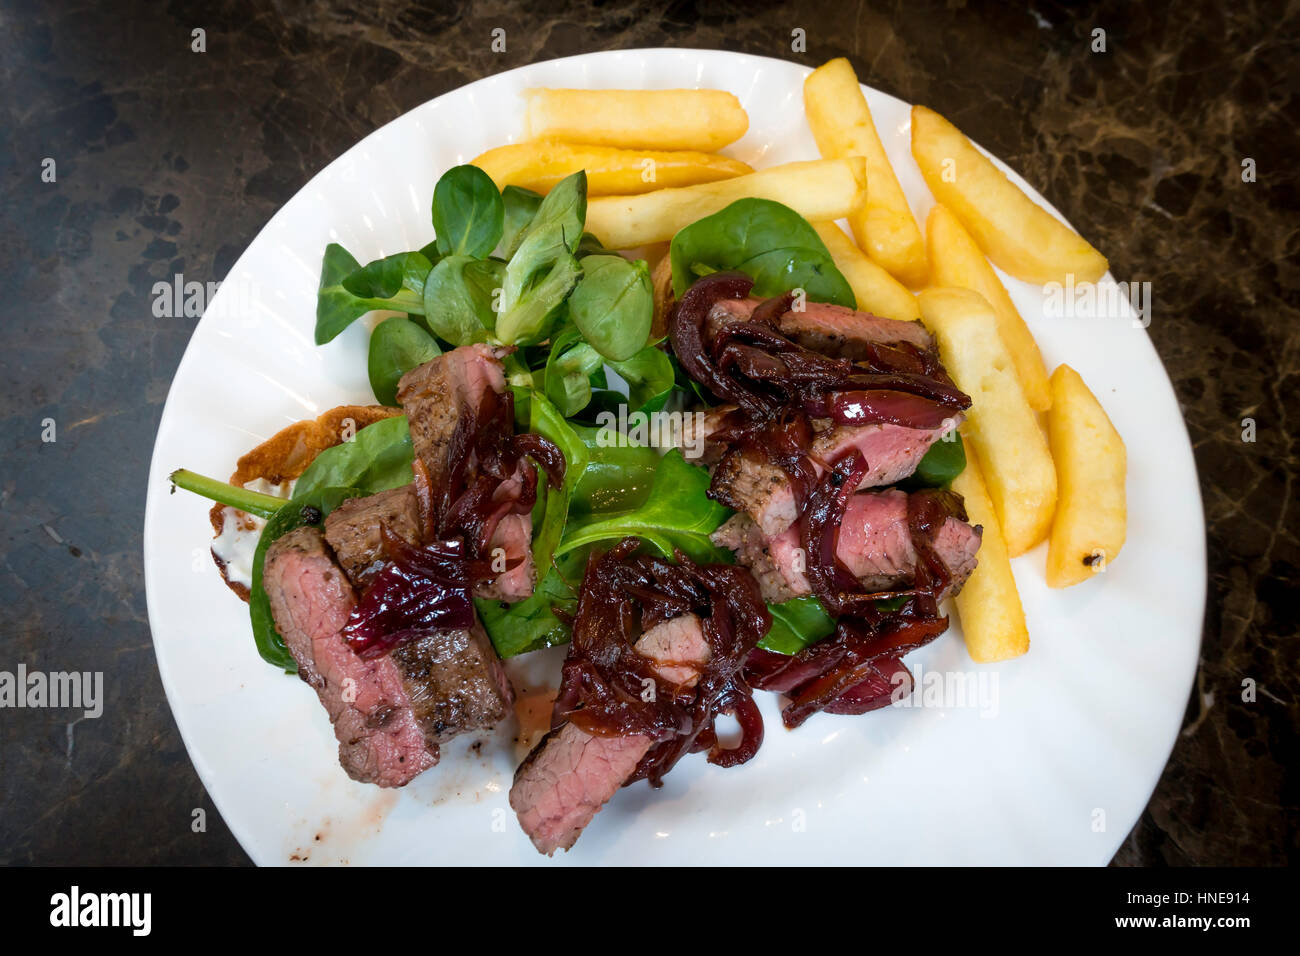 Lunchtime snack Steak open sandwich served with caramelised red onion, horseradish mayonnaise, baby leaf spinach and Chips Stock Photo